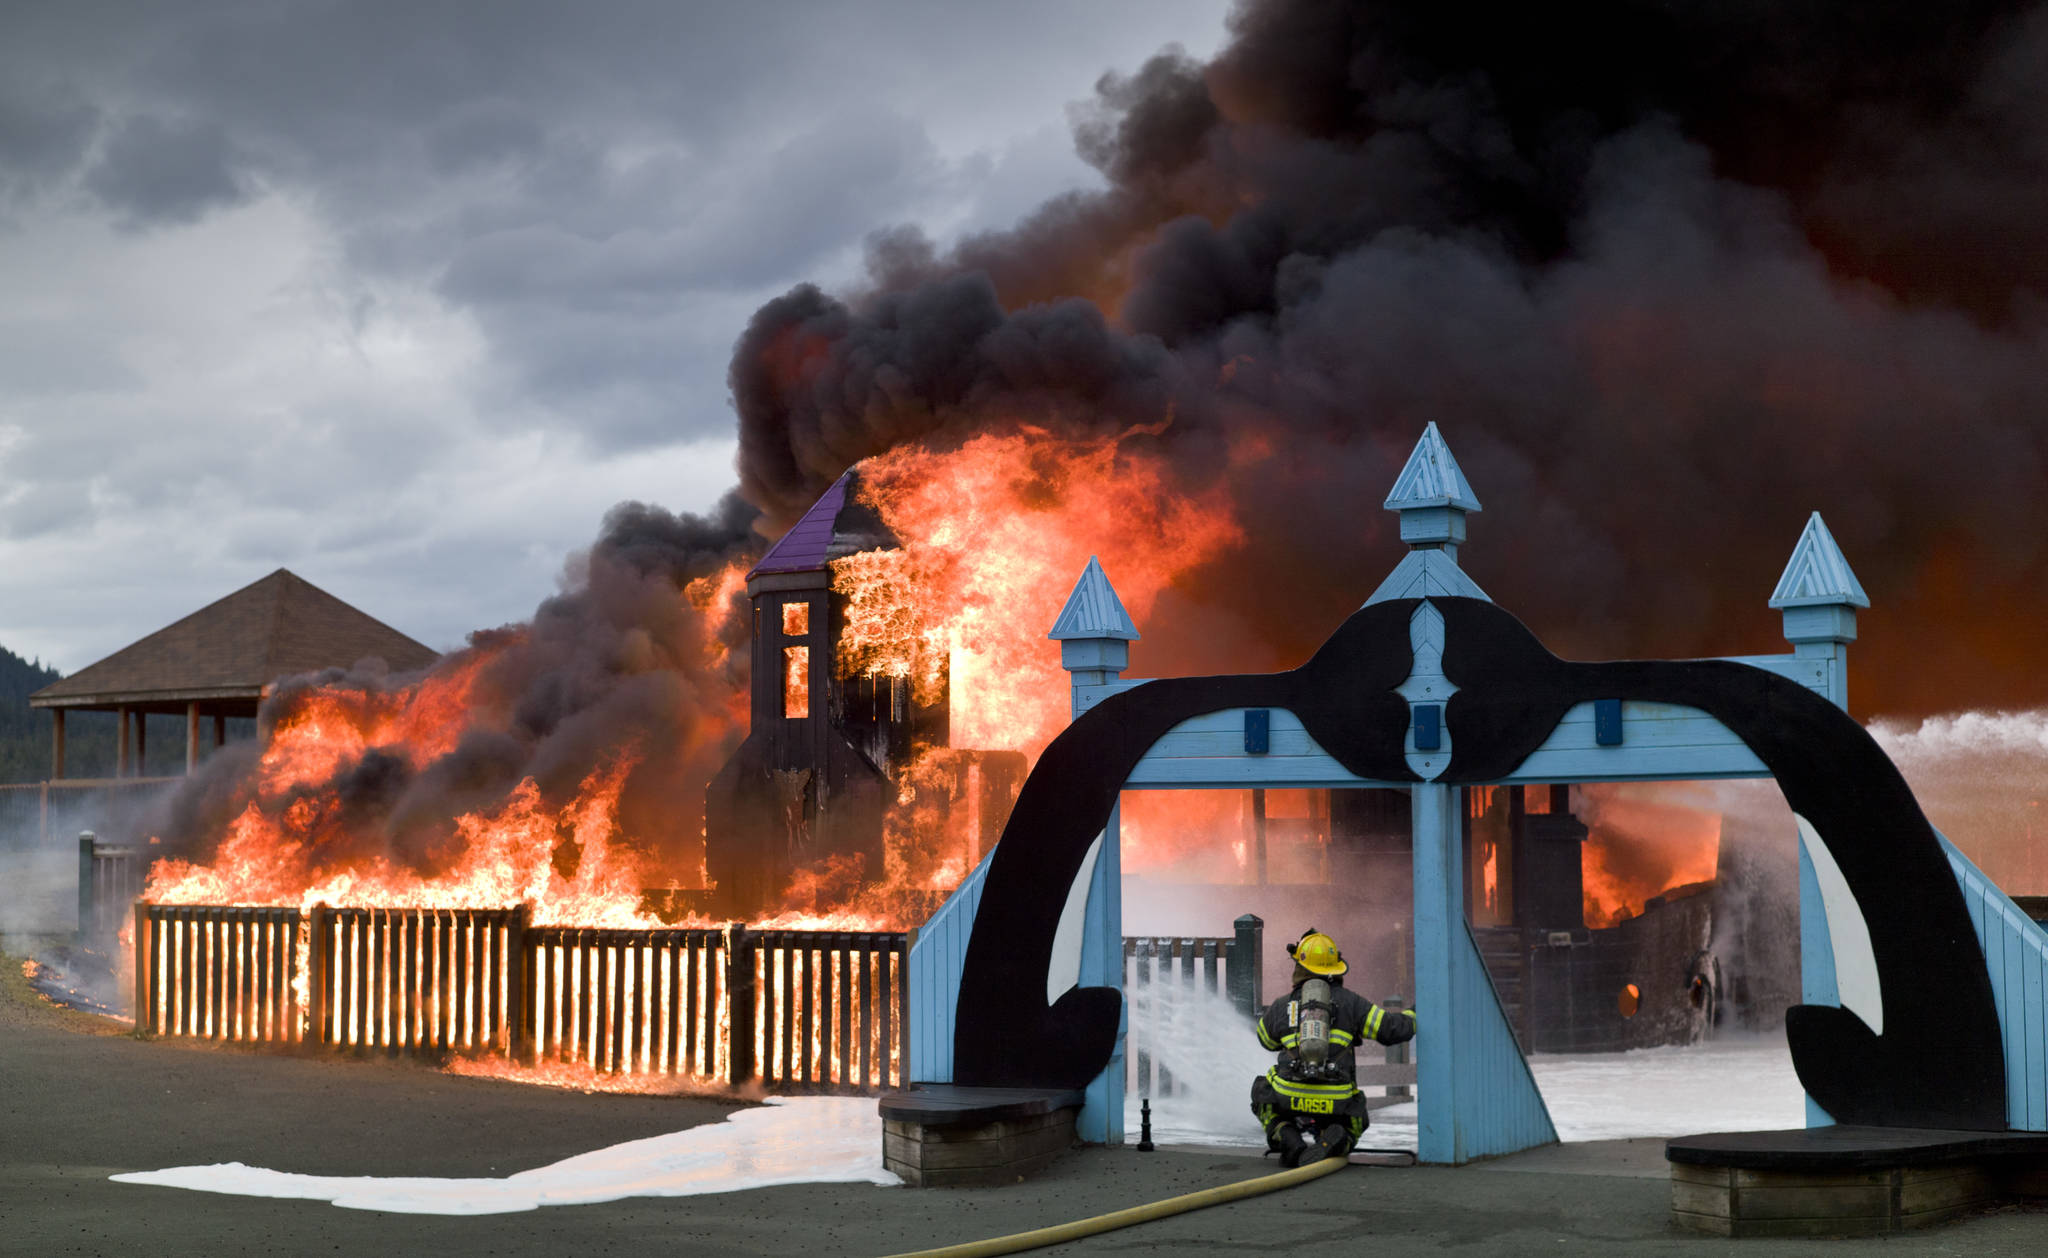 Capital City Fire/Rescue personnel fire a fire that consumes the playground at Twin Lakes on Monday, April 24, 2017. (Michael Penn | Juneau Empire)